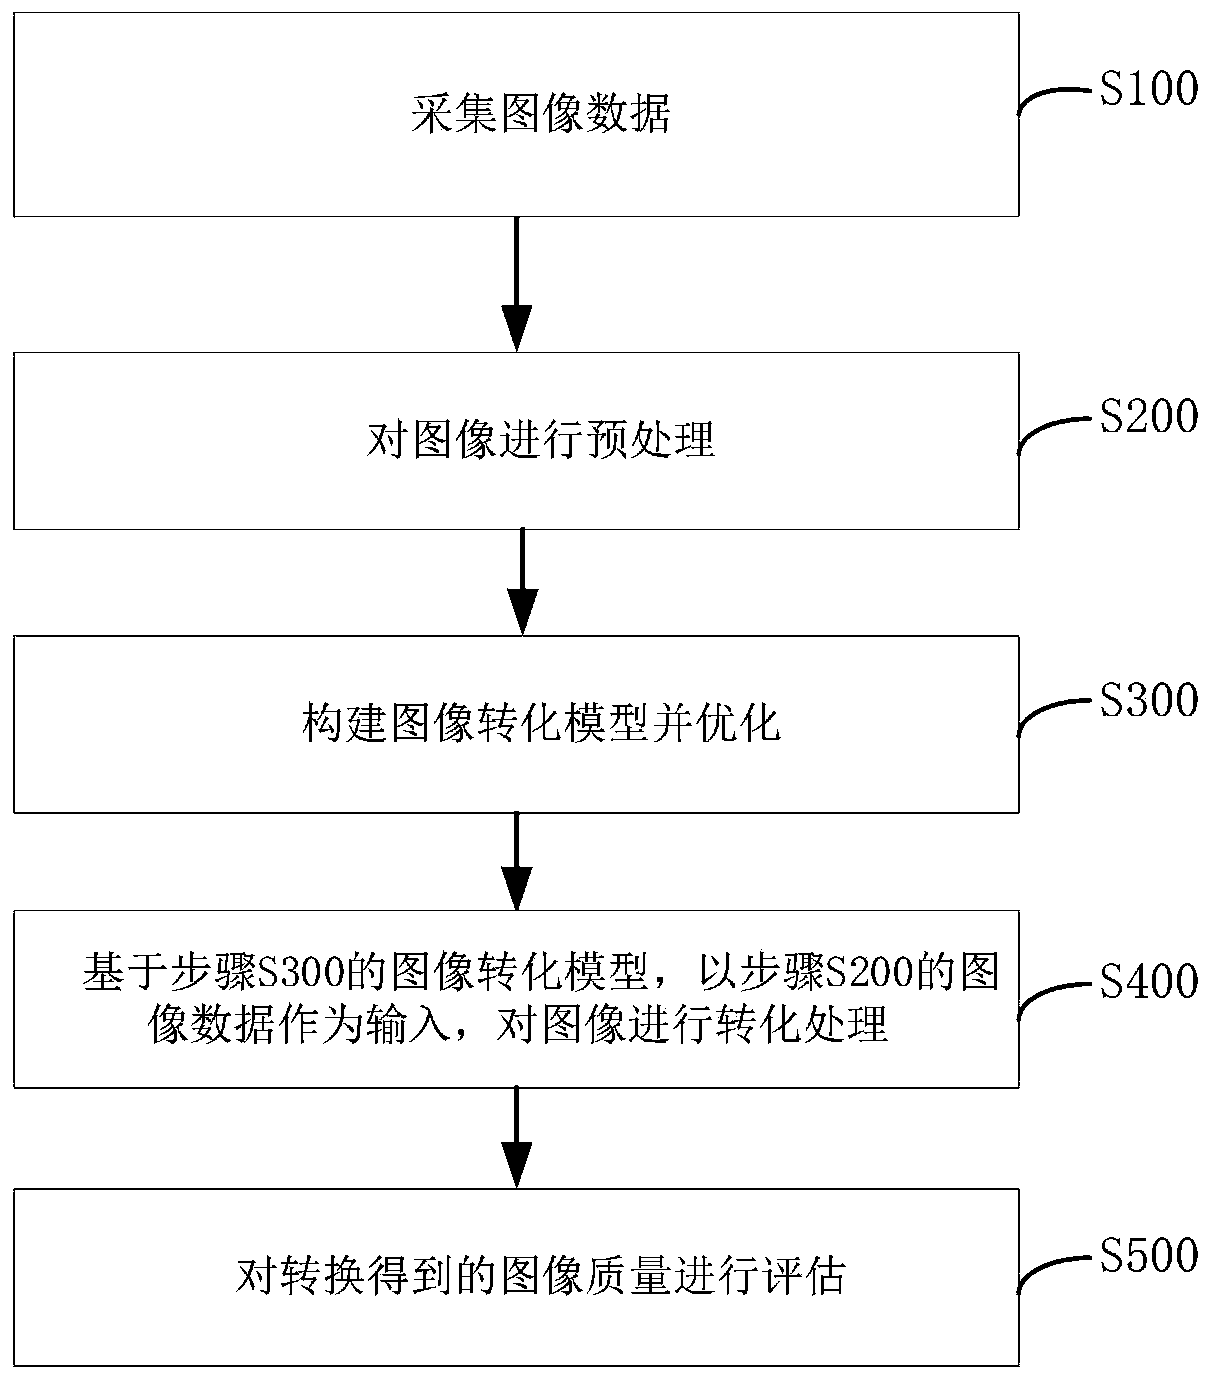 Image multi-style conversion method based on latent variable feature generation